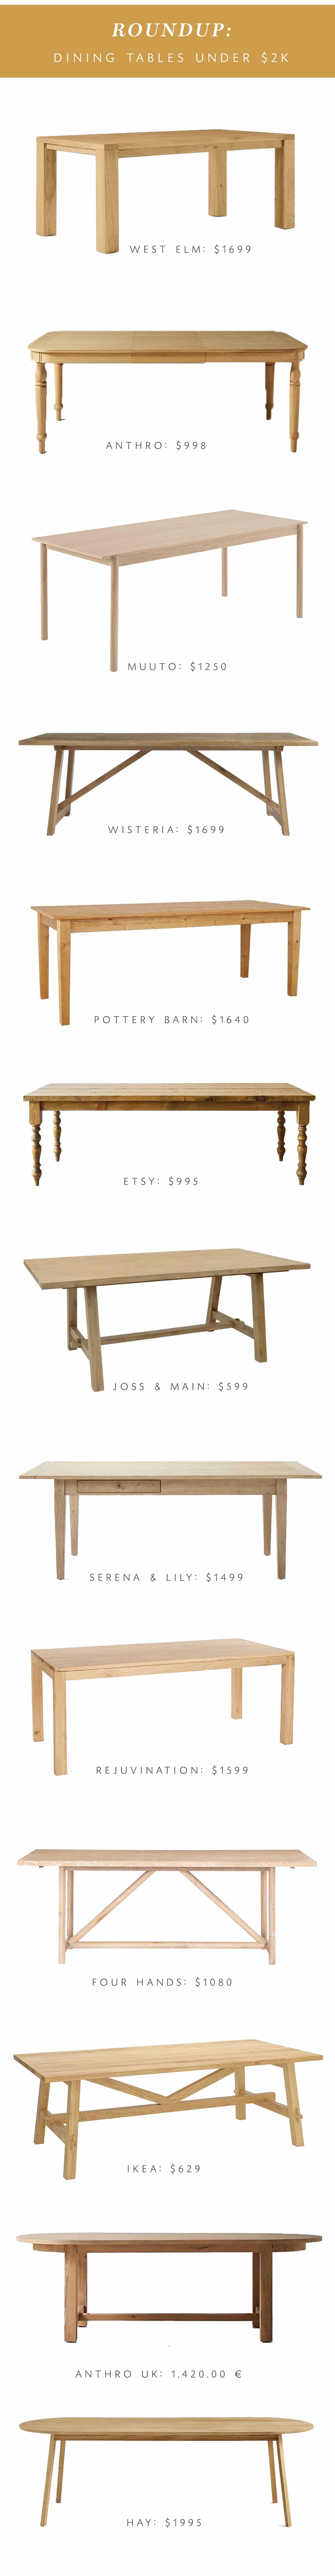 oak dining tables under $2k roundup on coco kelley